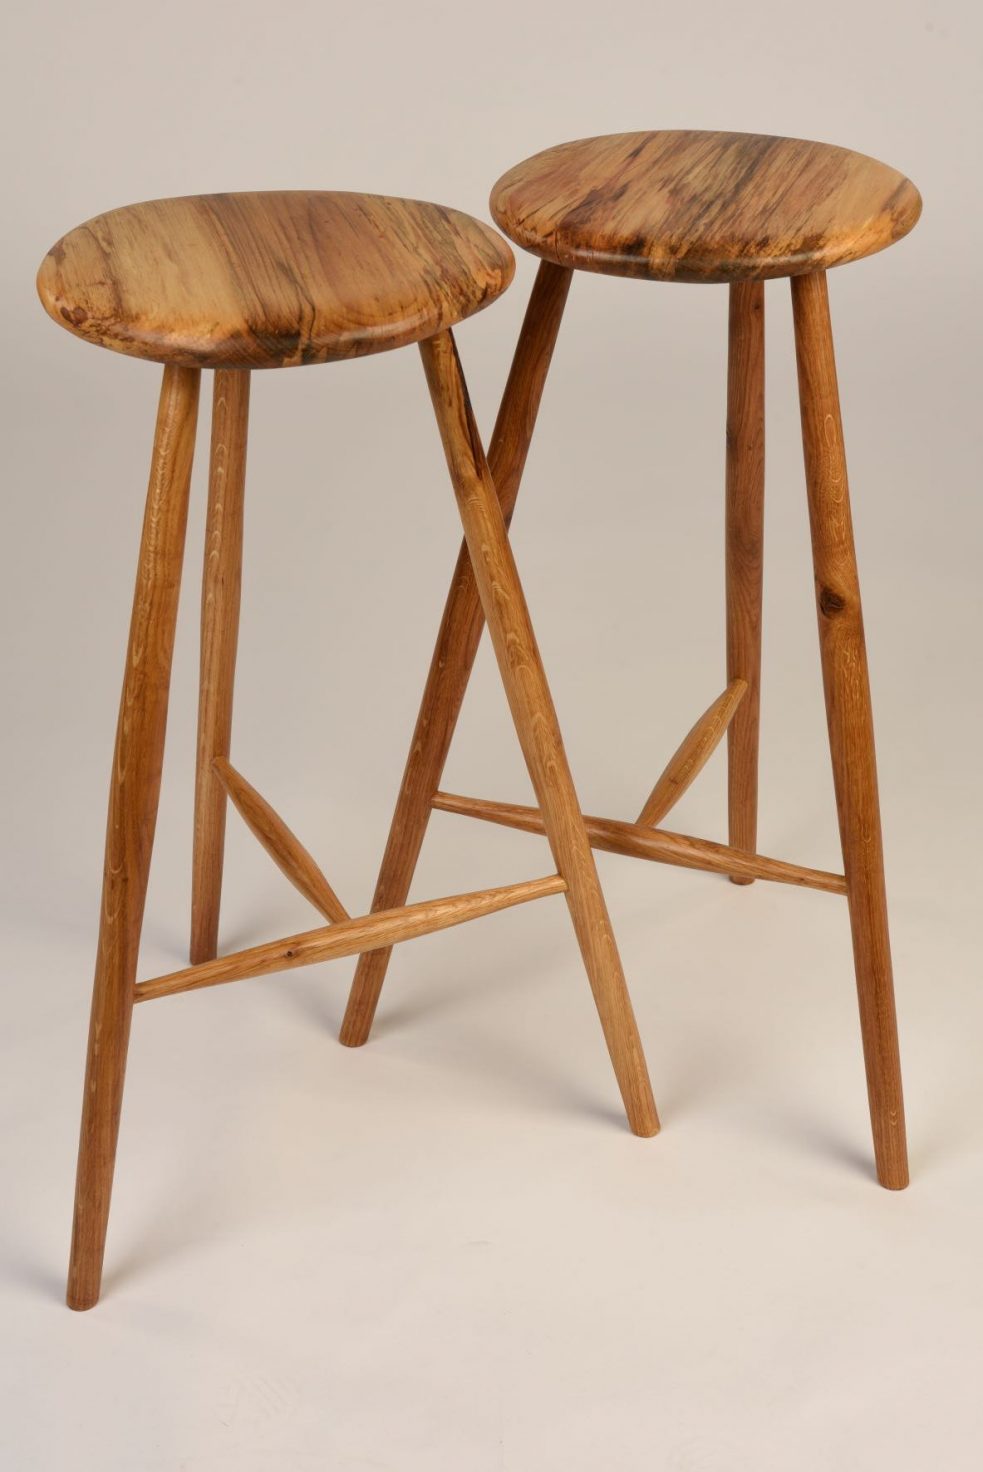 image of two hand made stools